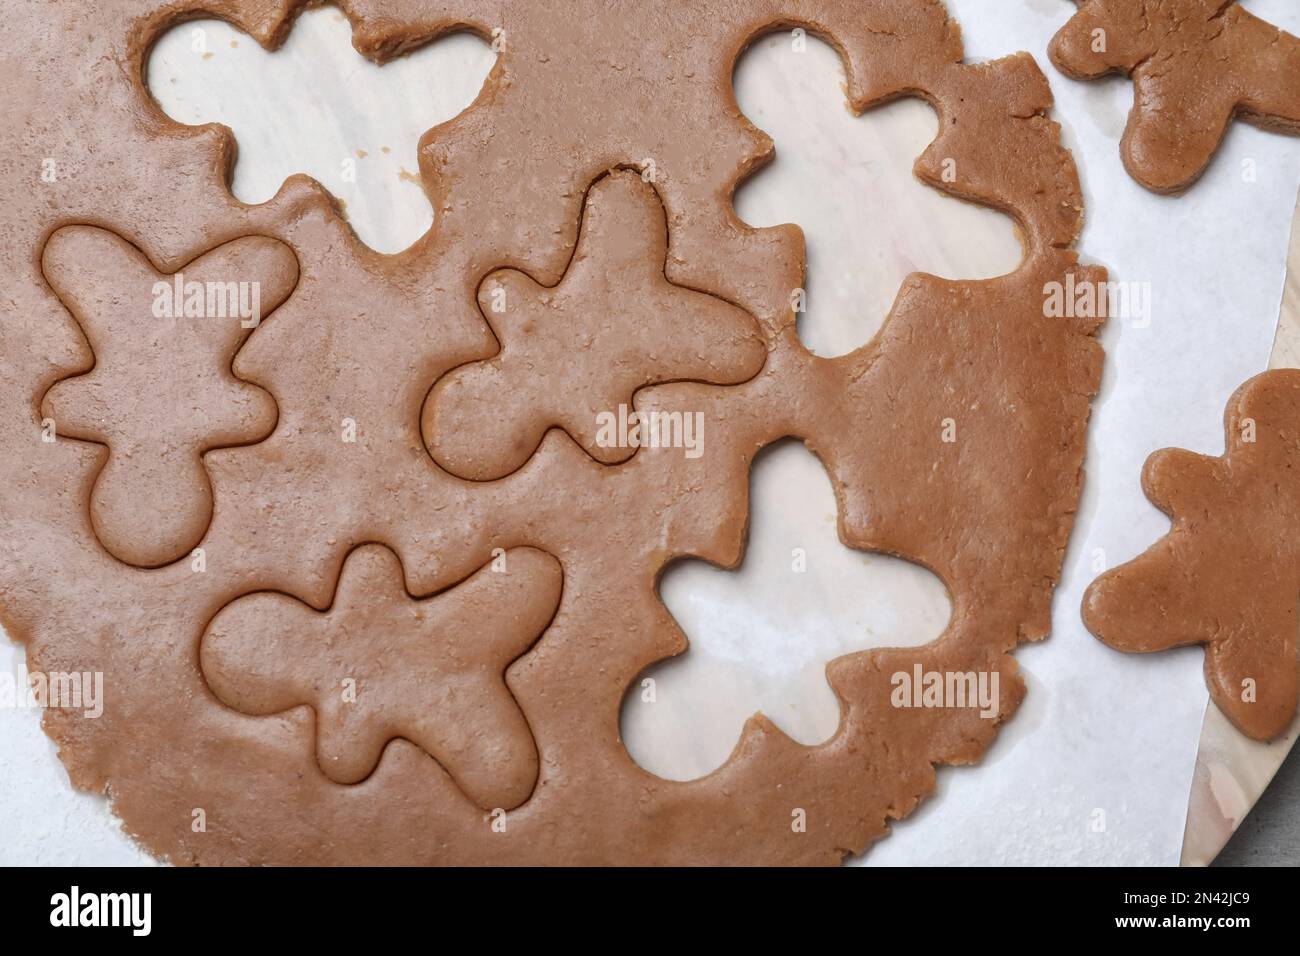 Making homemade Christmas cookies. Dough for gingerbread man on parchment, flat lay Stock Photo